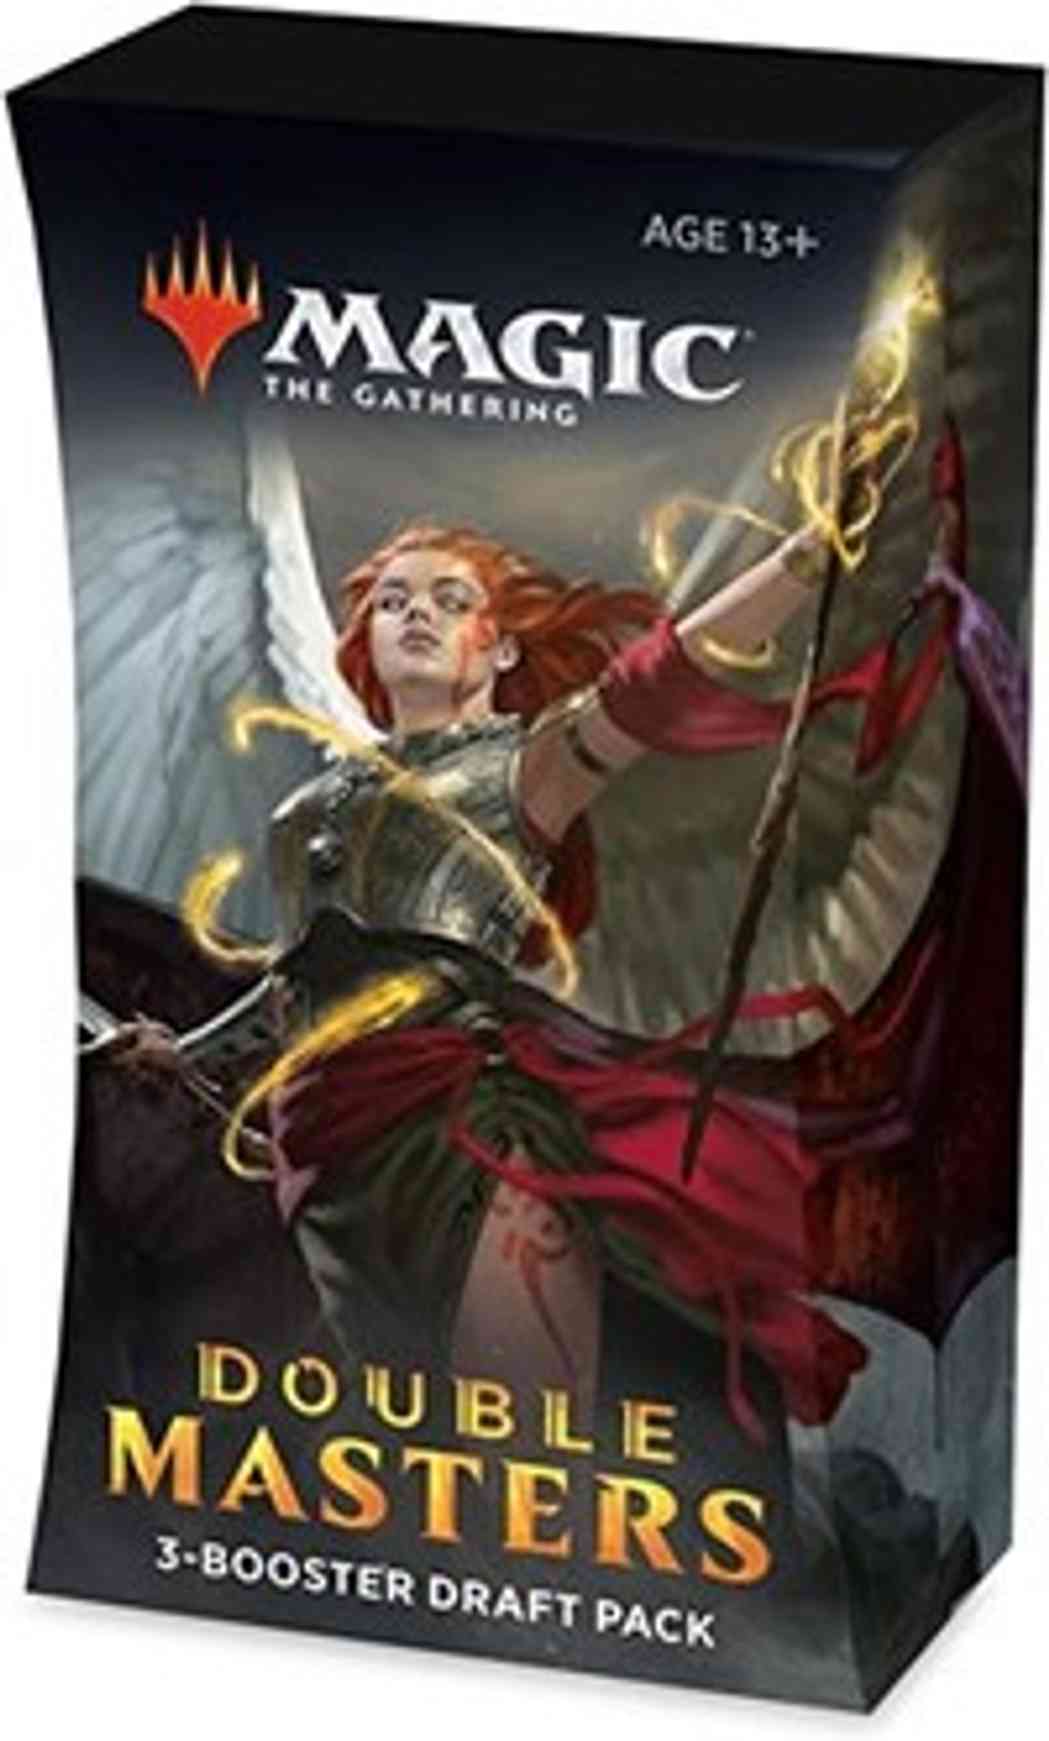 Double Masters - 3-Booster Draft Pack magic card front